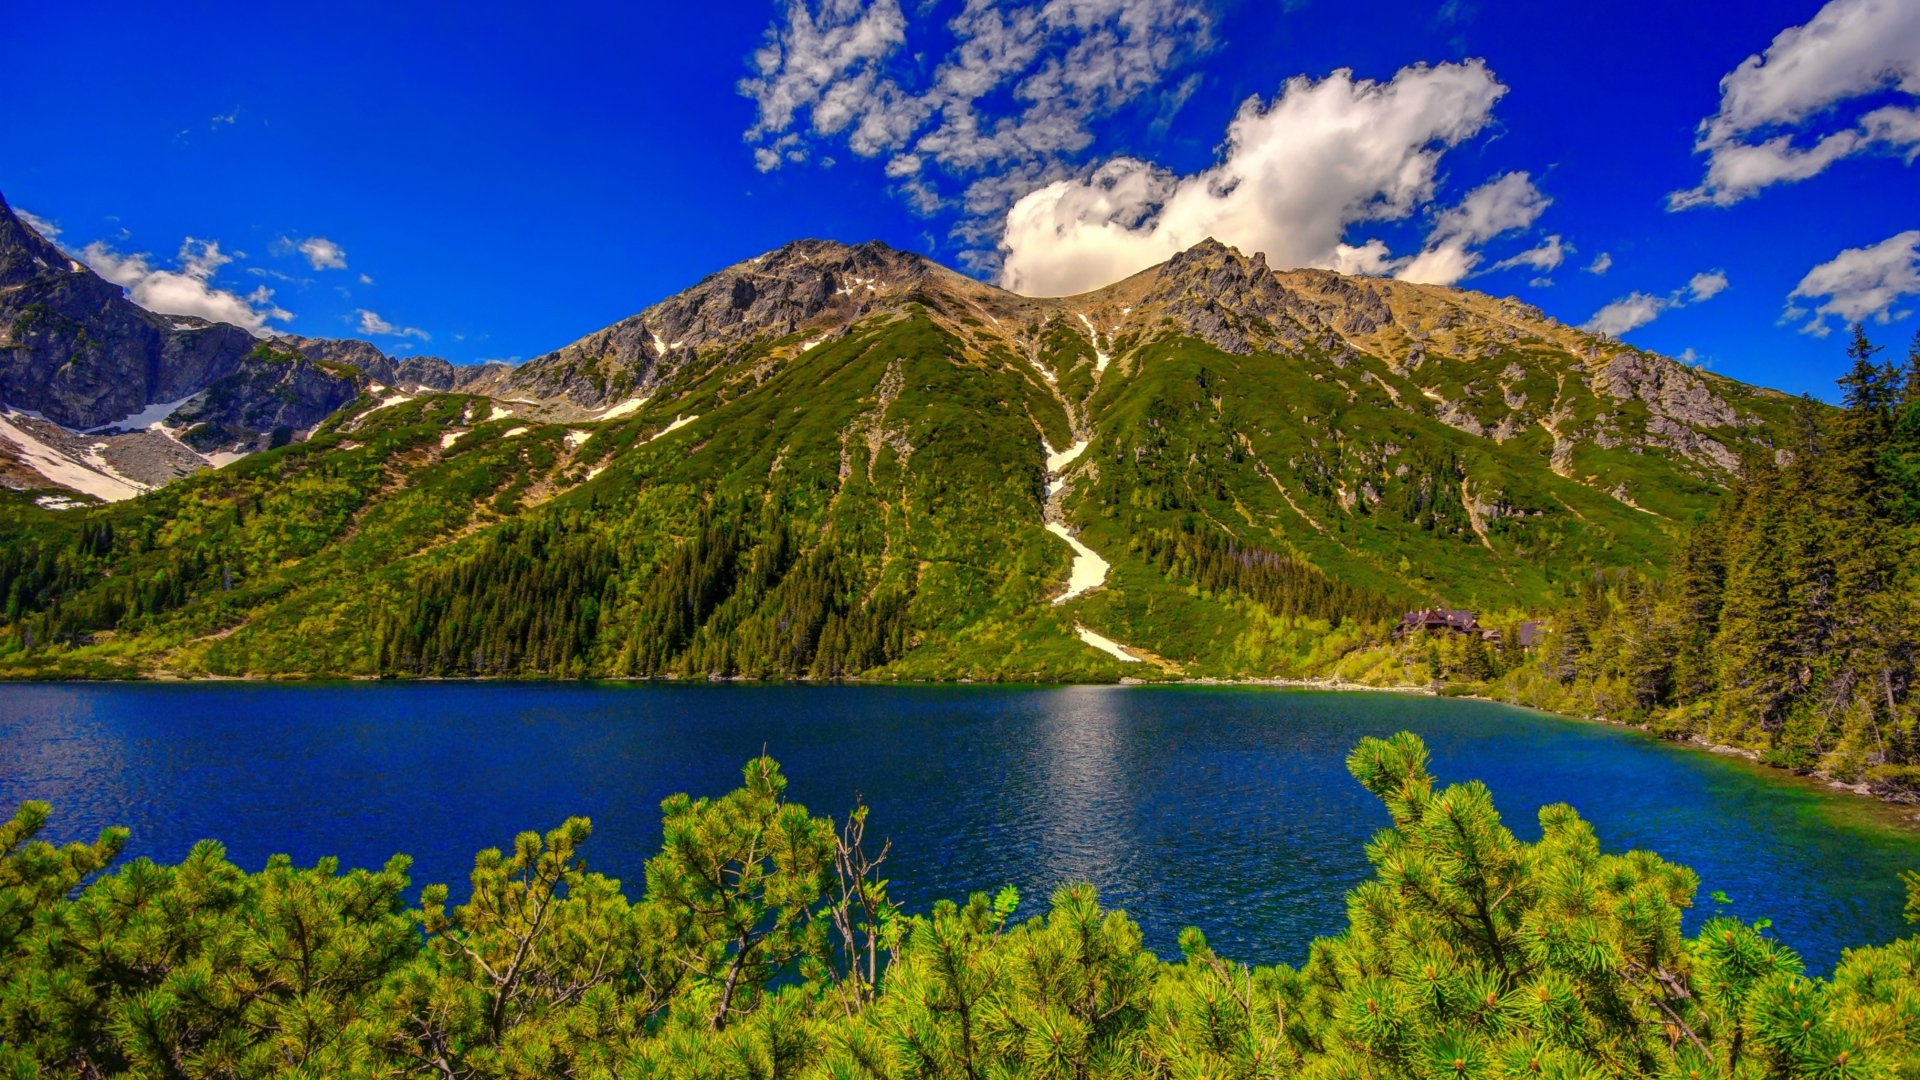 View of the lake near the Tatry mountain against the background of a beautiful blue sky